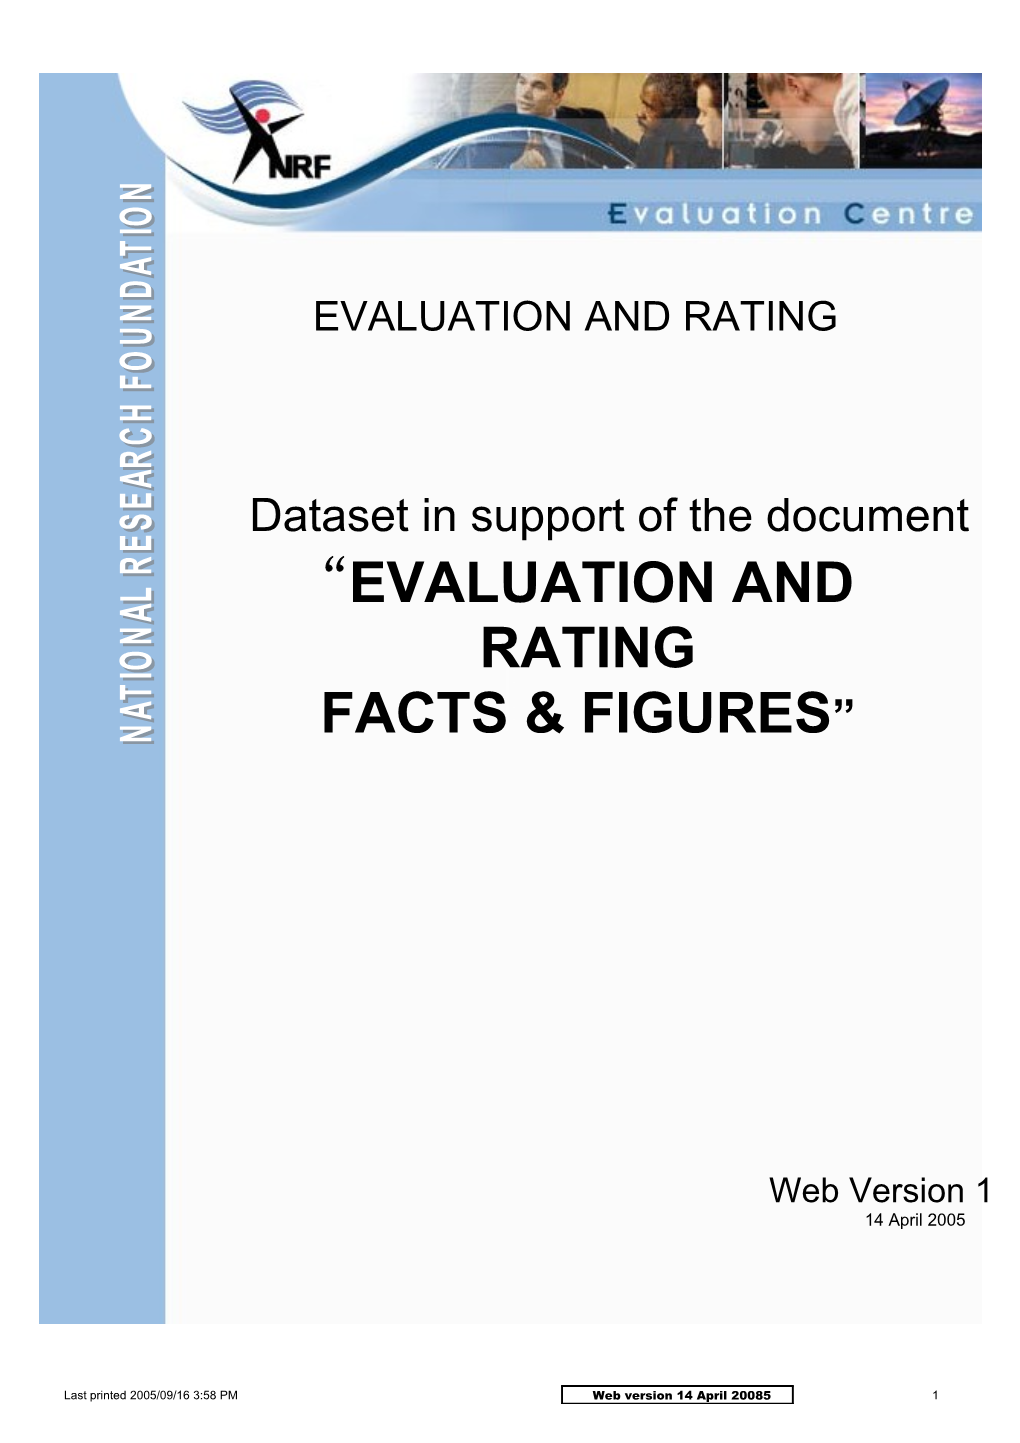 Nrf Evaluation and Rating